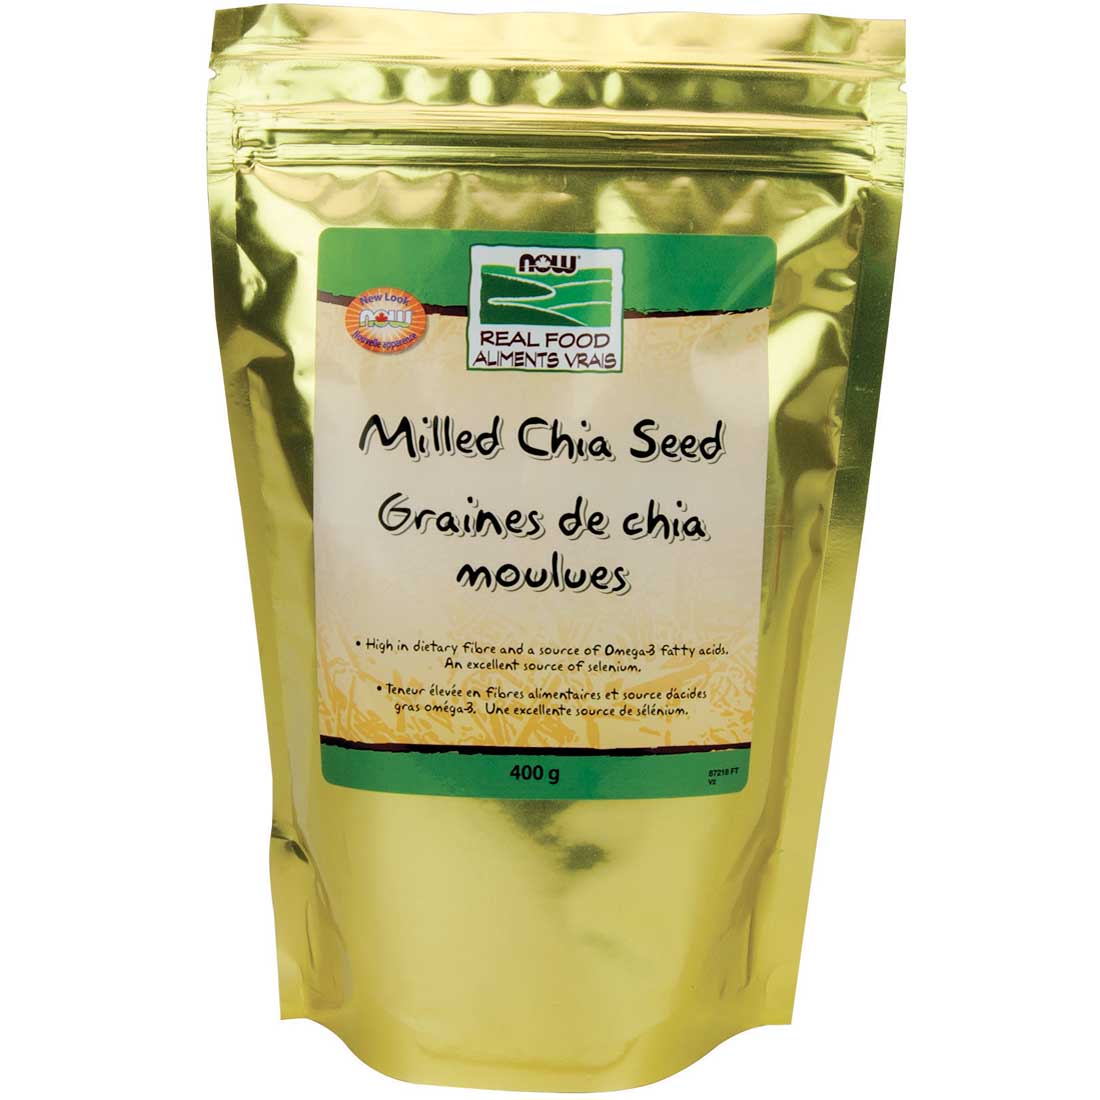 NOW Milled Chia Seed, 400g